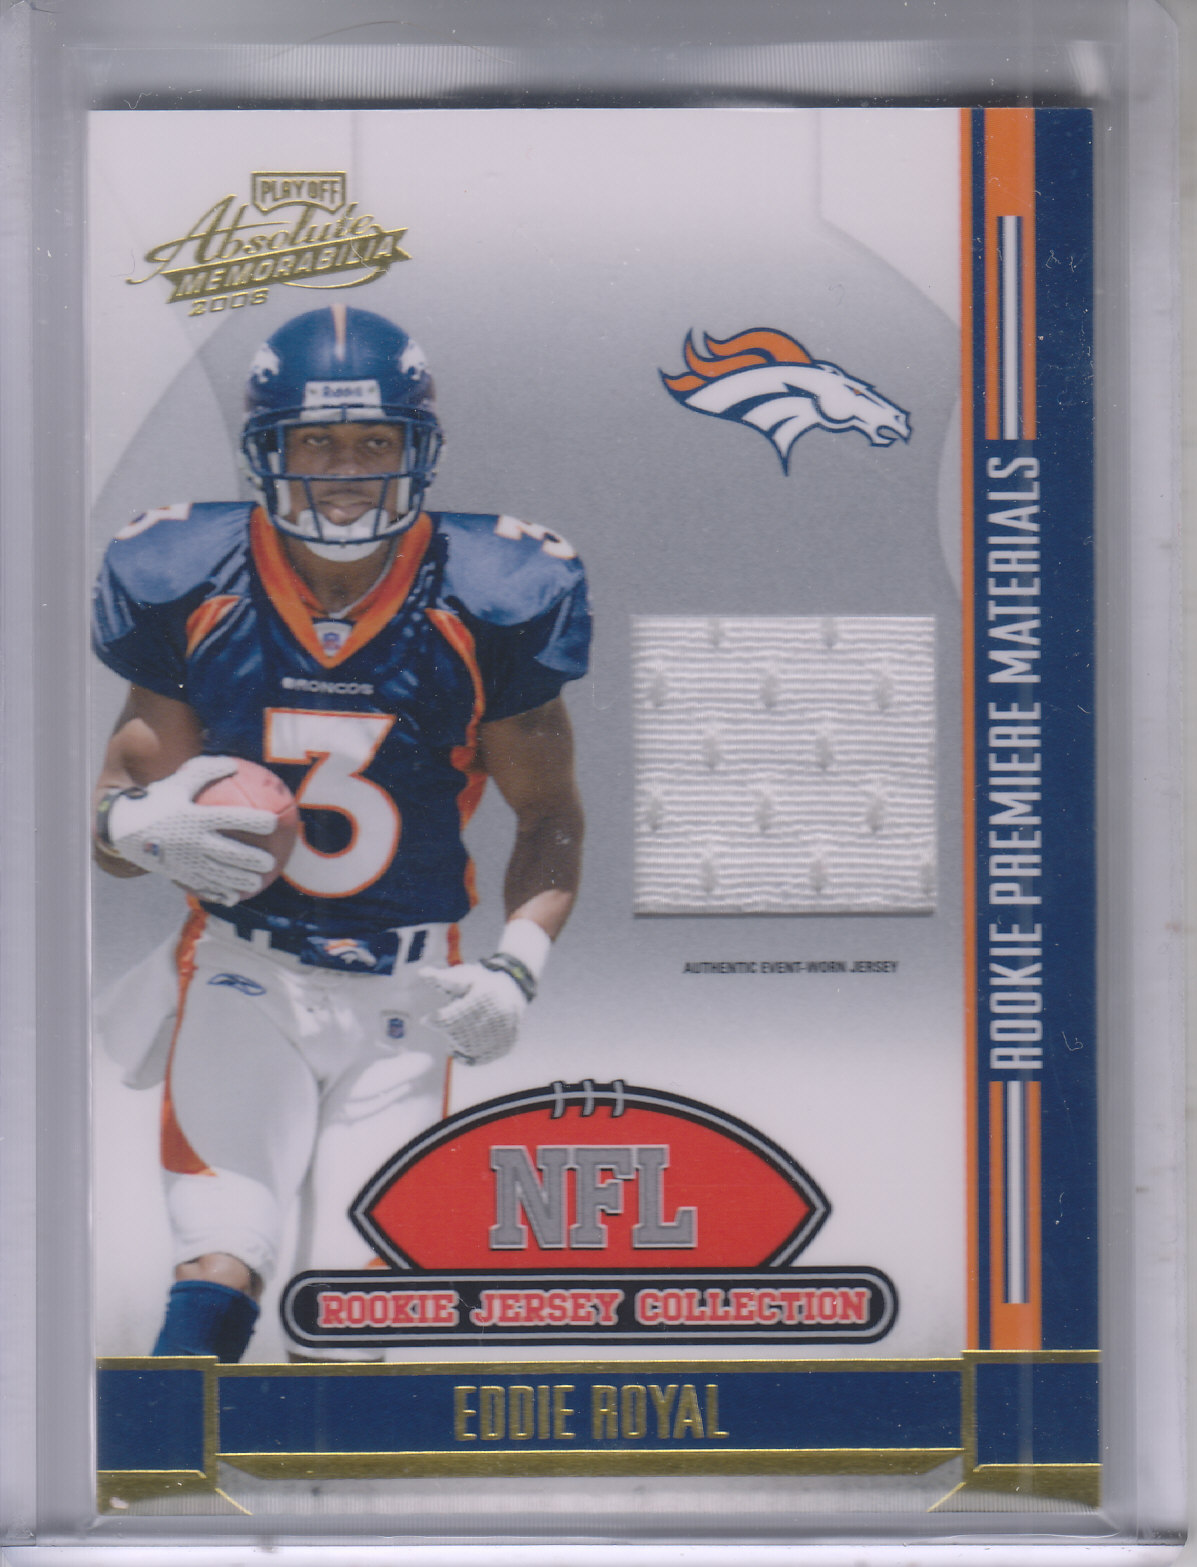 2008 Absolute Memorabilia Rookie Jersey Collection #7 Eddie Royal